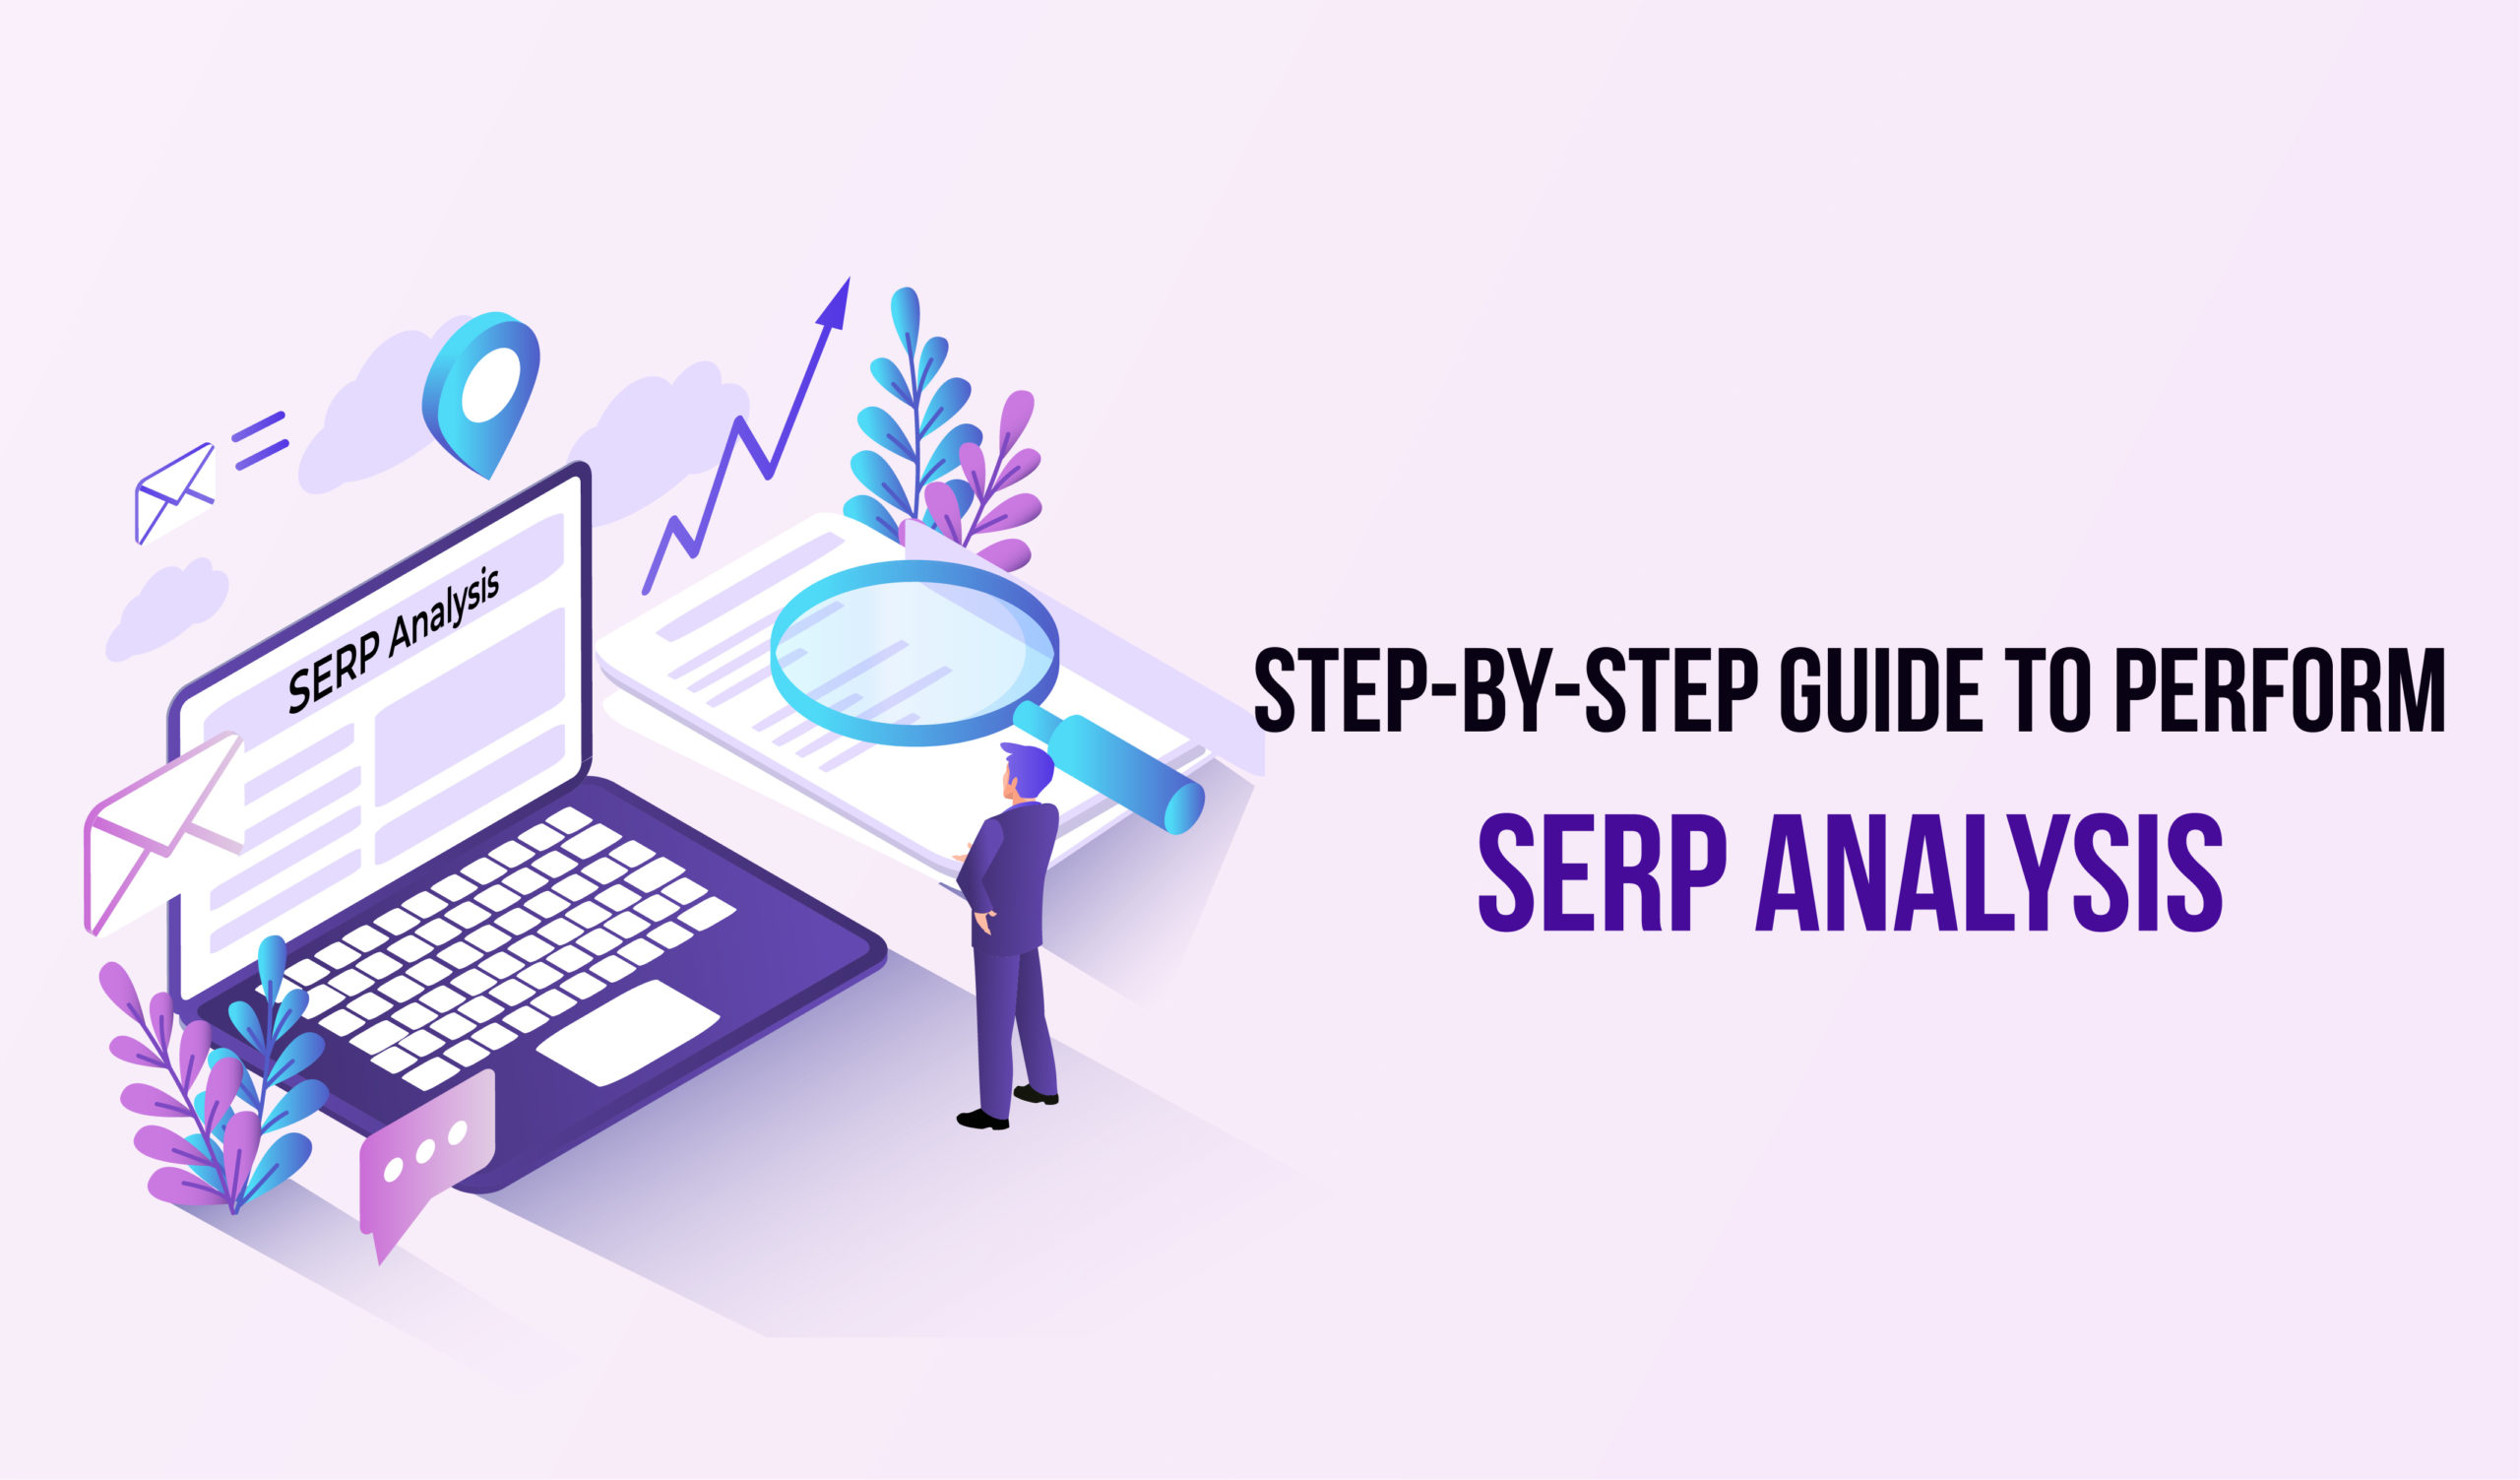 A step-by-step guide to performing SERP analysis